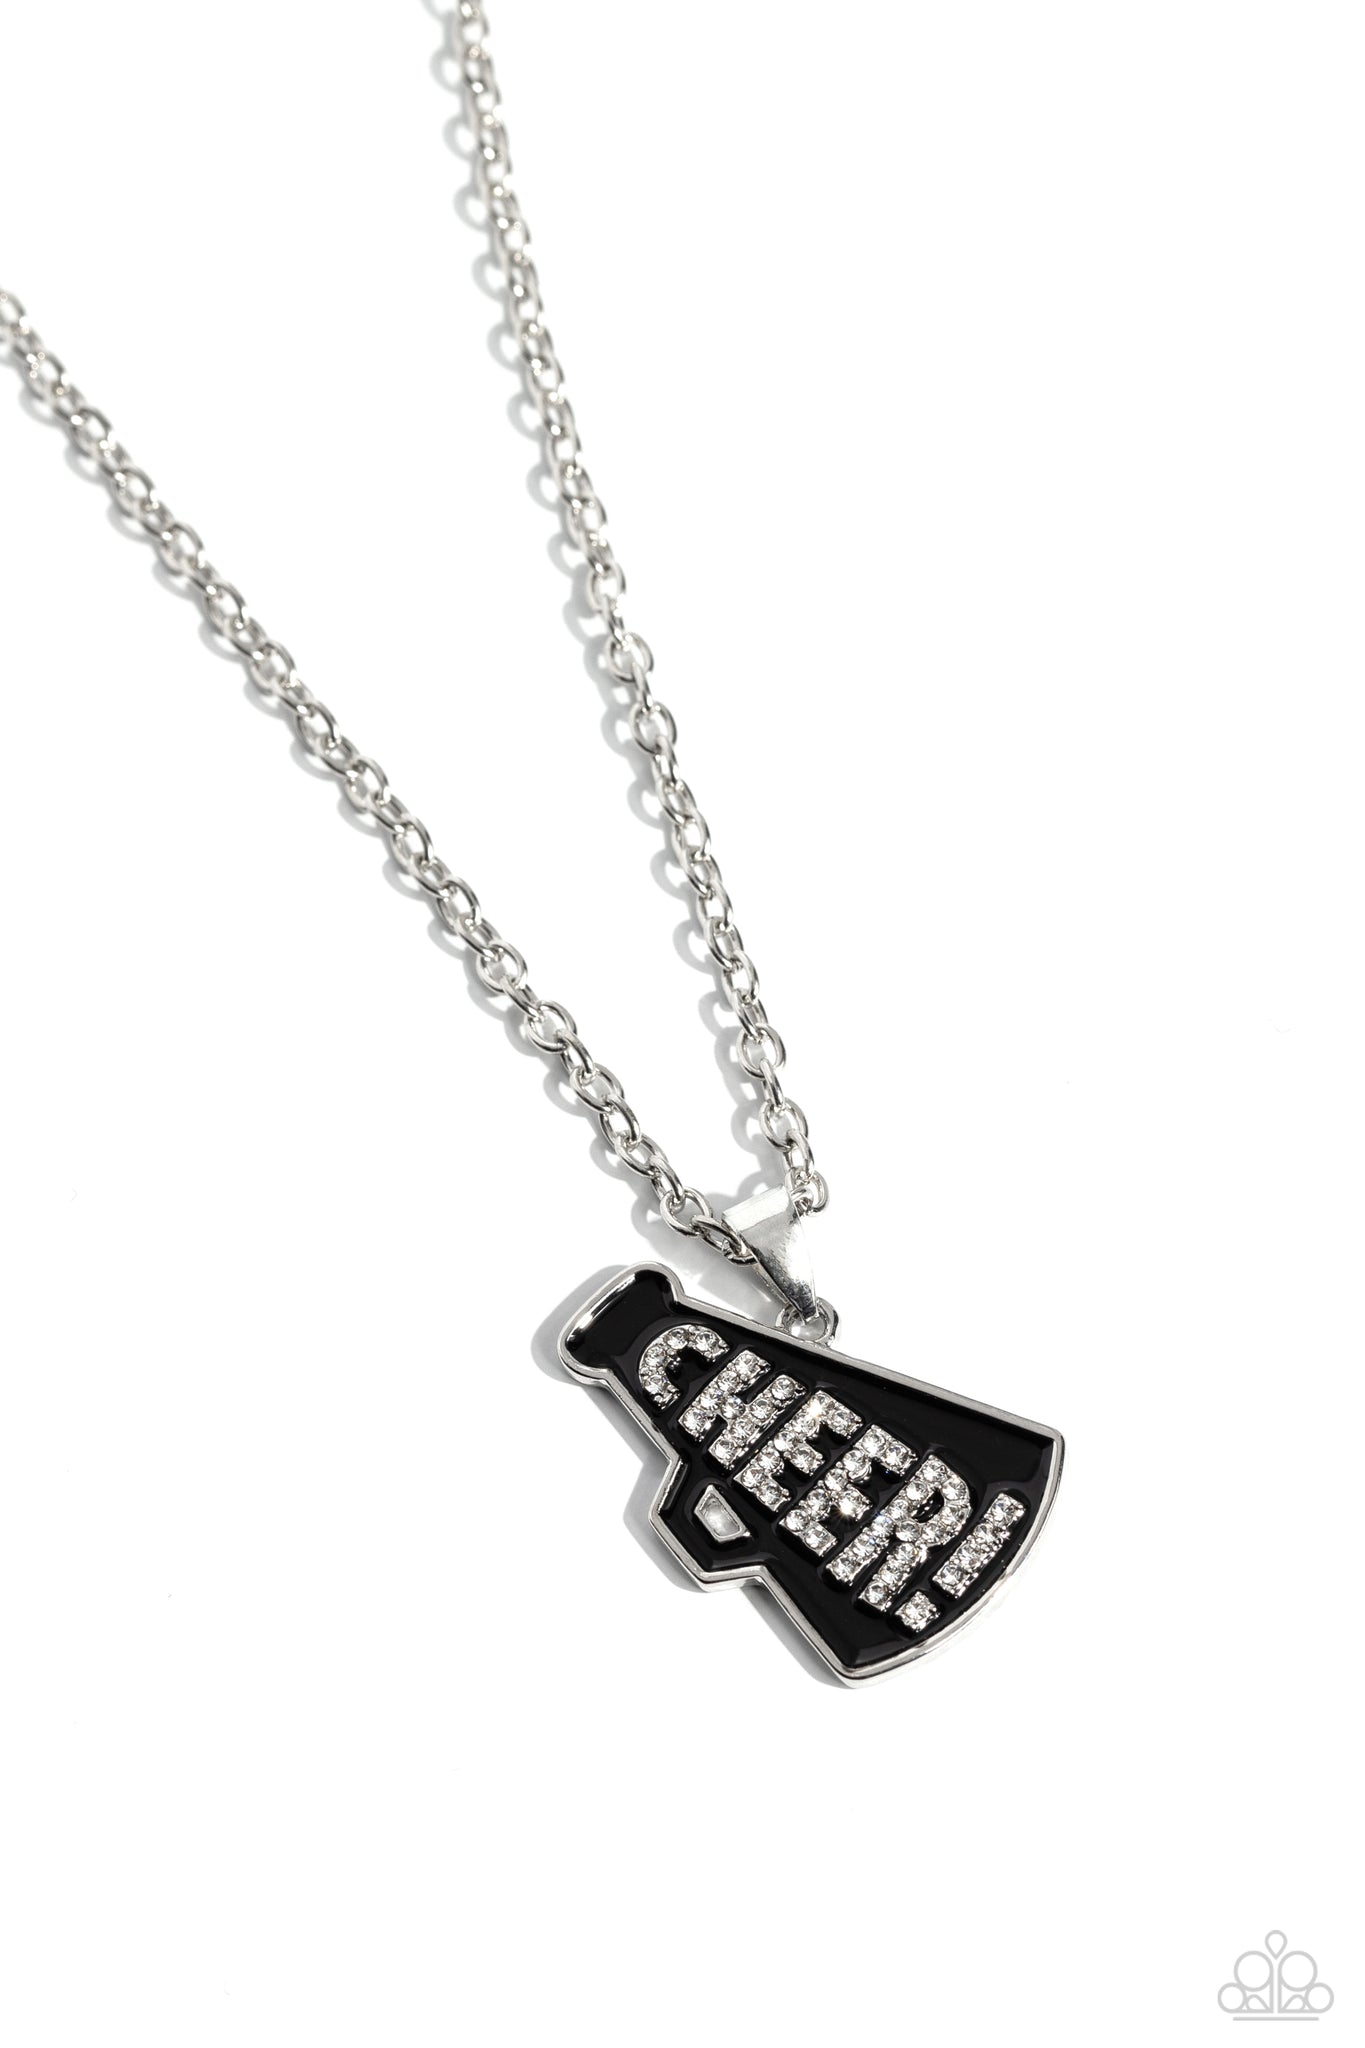 Personalized Stamped Cheer Necklace and gift jewelry – MyTeamJewelryShop